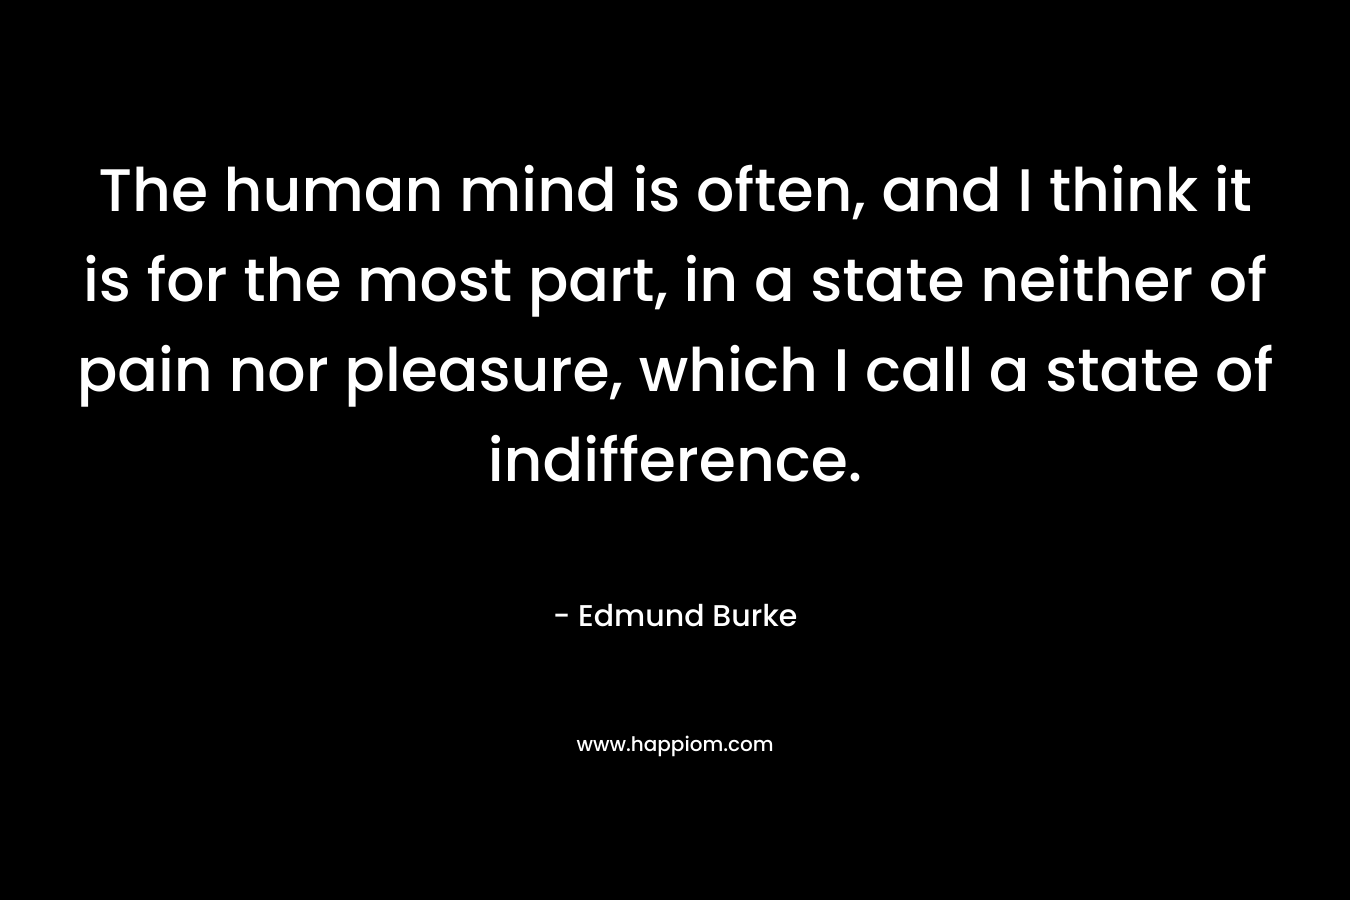 The human mind is often, and I think it is for the most part, in a state neither of pain nor pleasure, which I call a state of indifference.